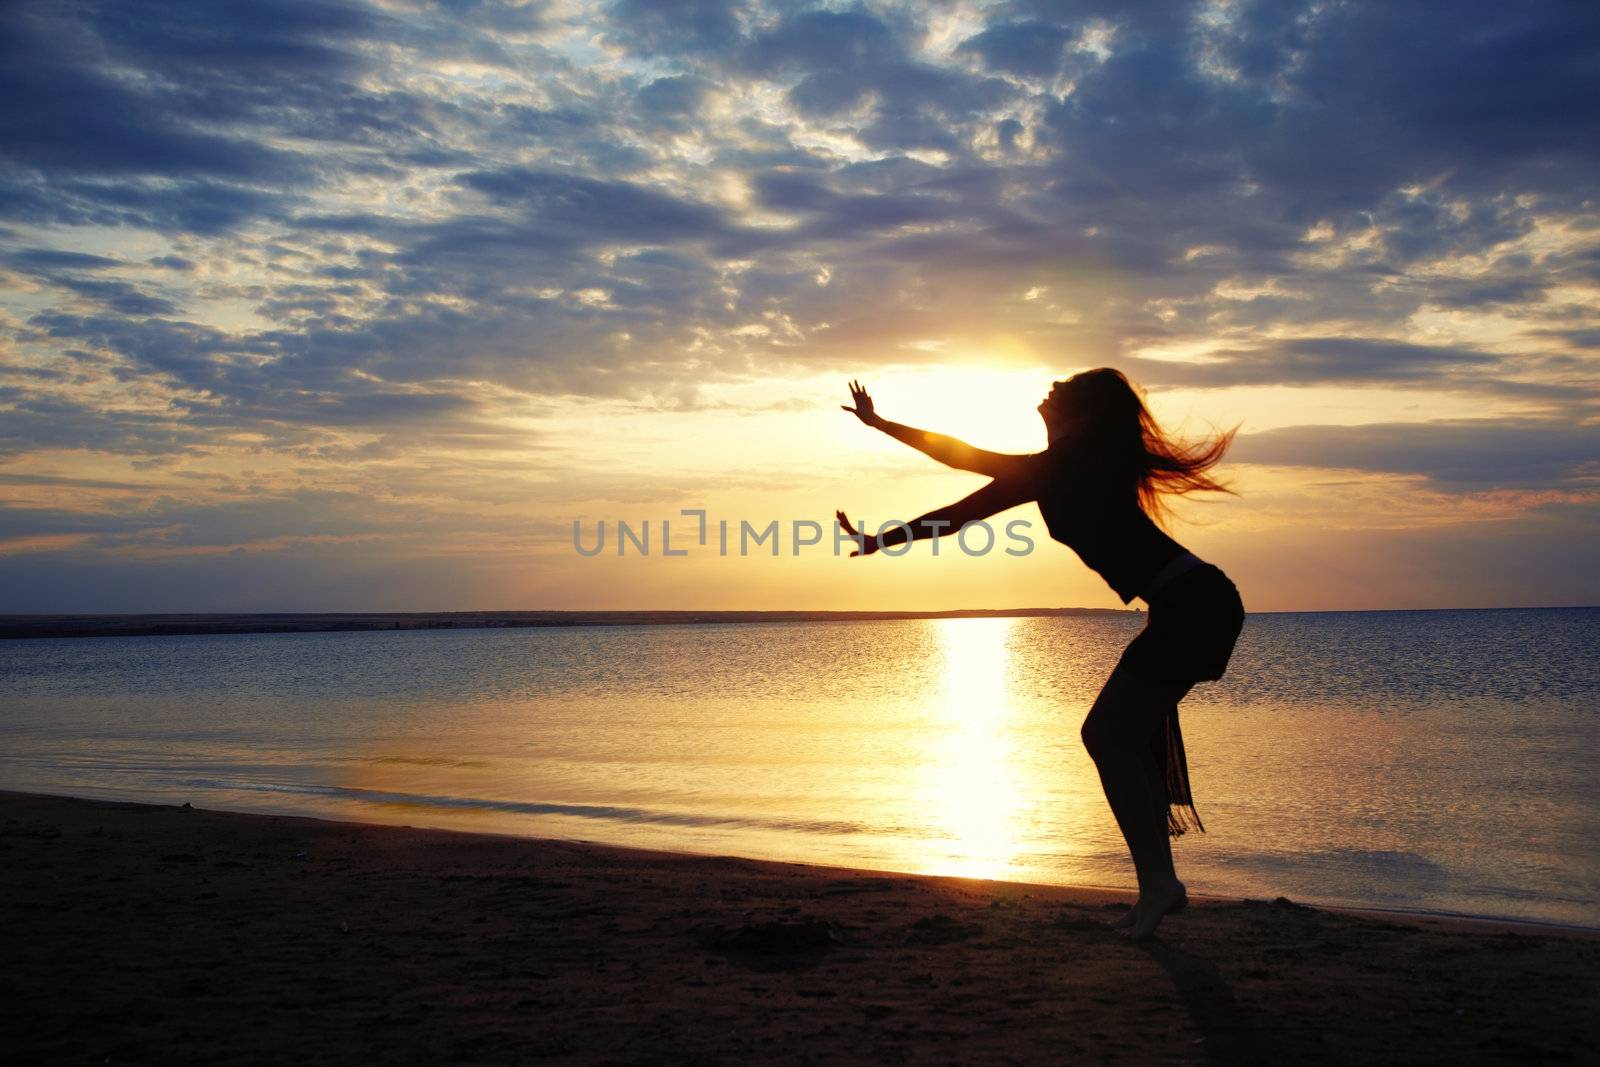 Active woman dancing at the beach during sunset